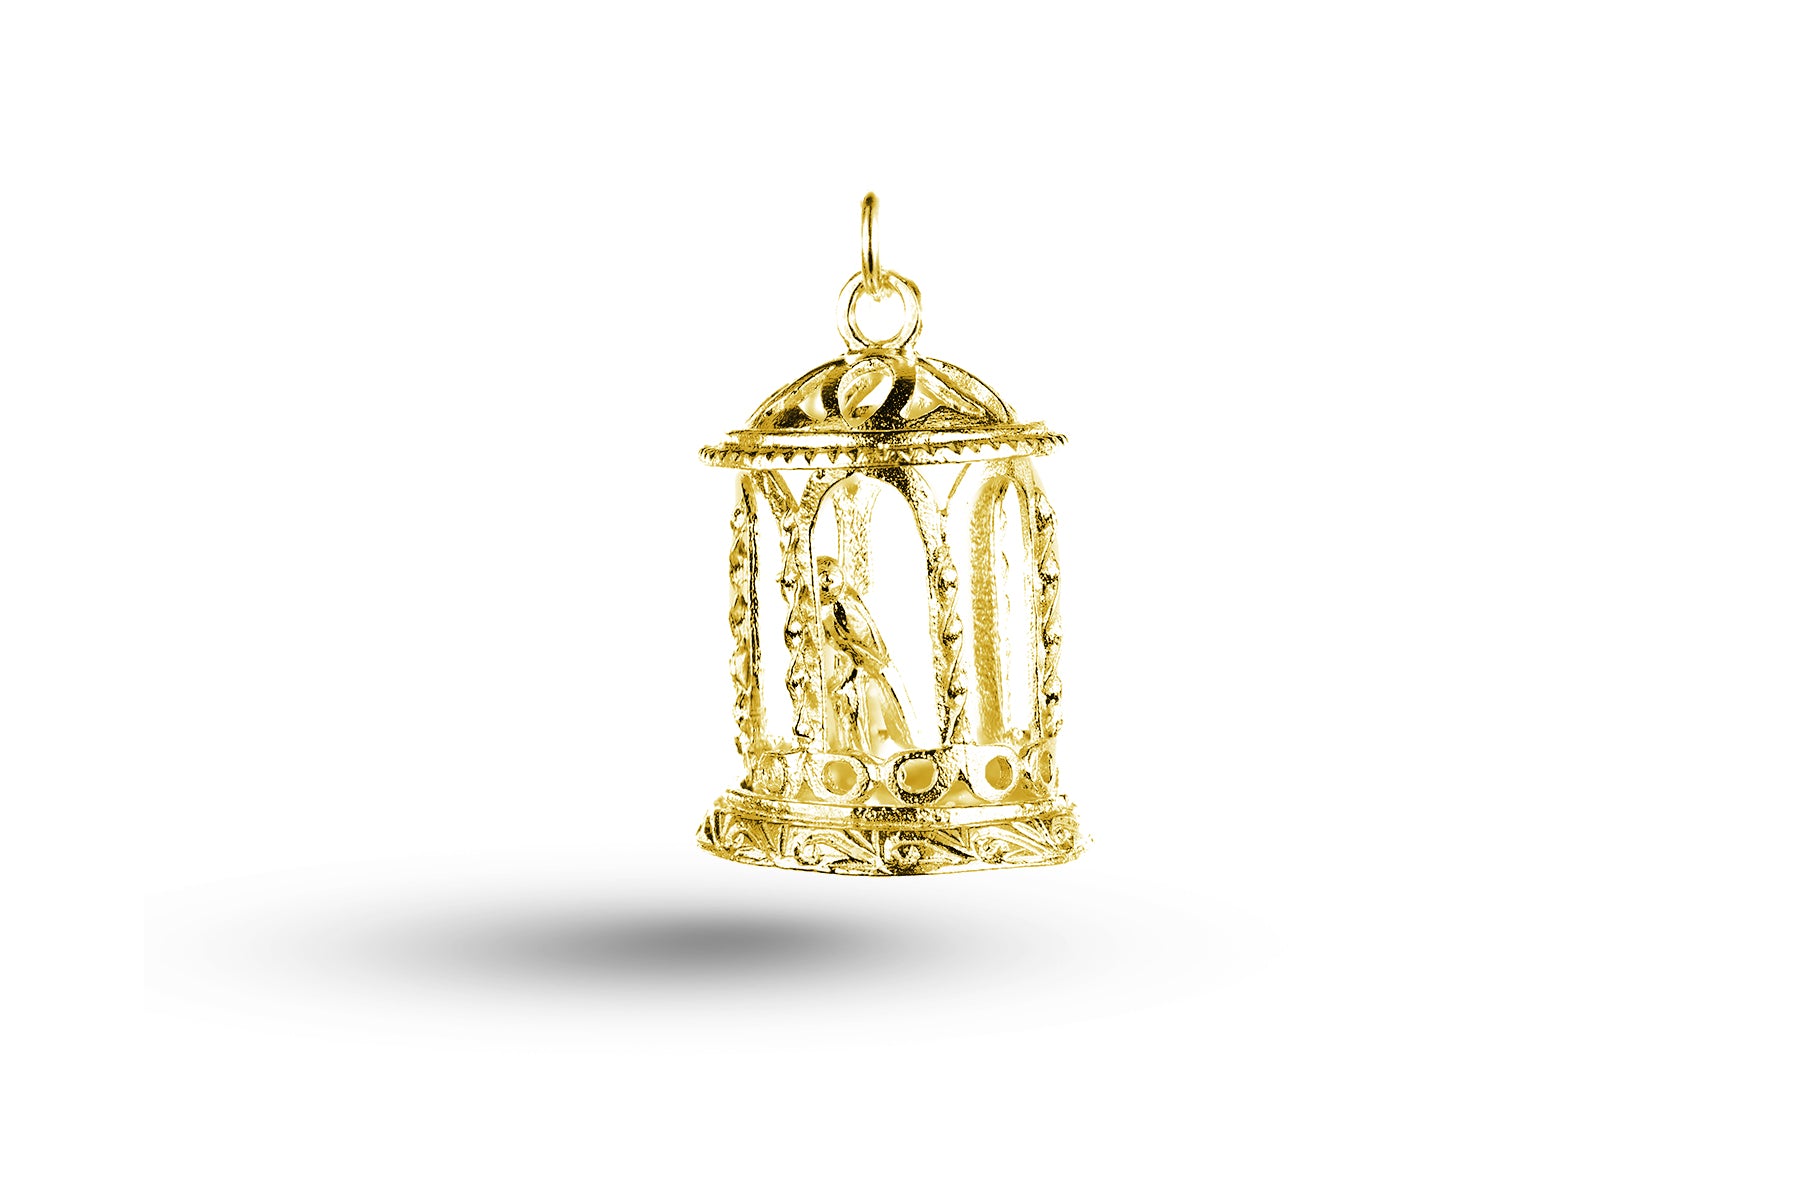 Luxury yellow gold bird in cage charm.